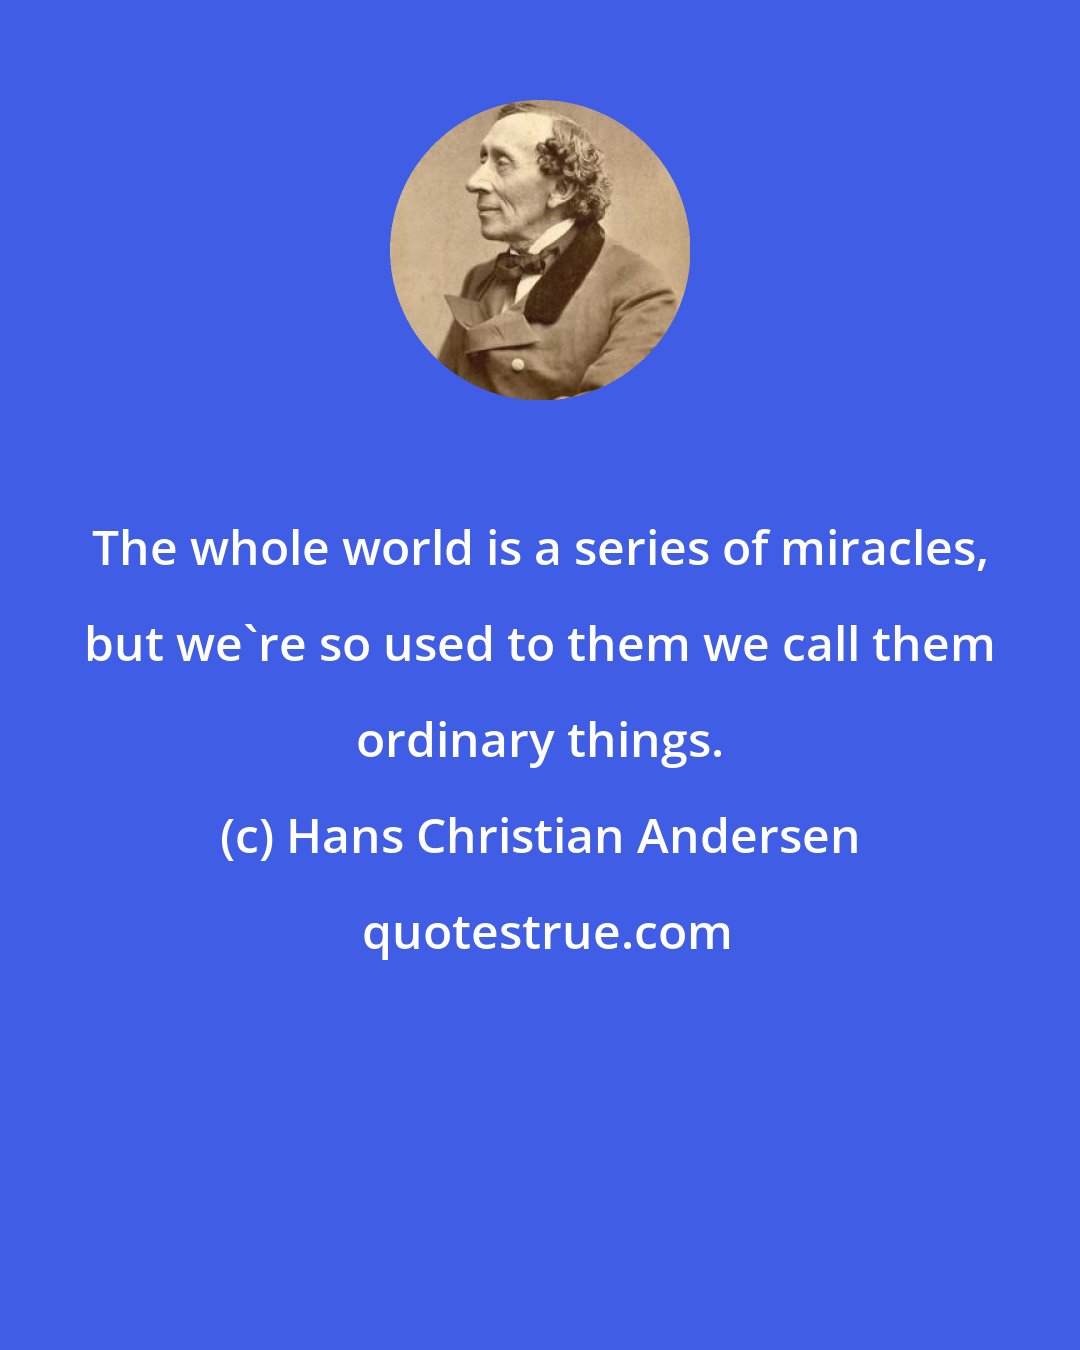 Hans Christian Andersen: The whole world is a series of miracles, but we're so used to them we call them ordinary things.